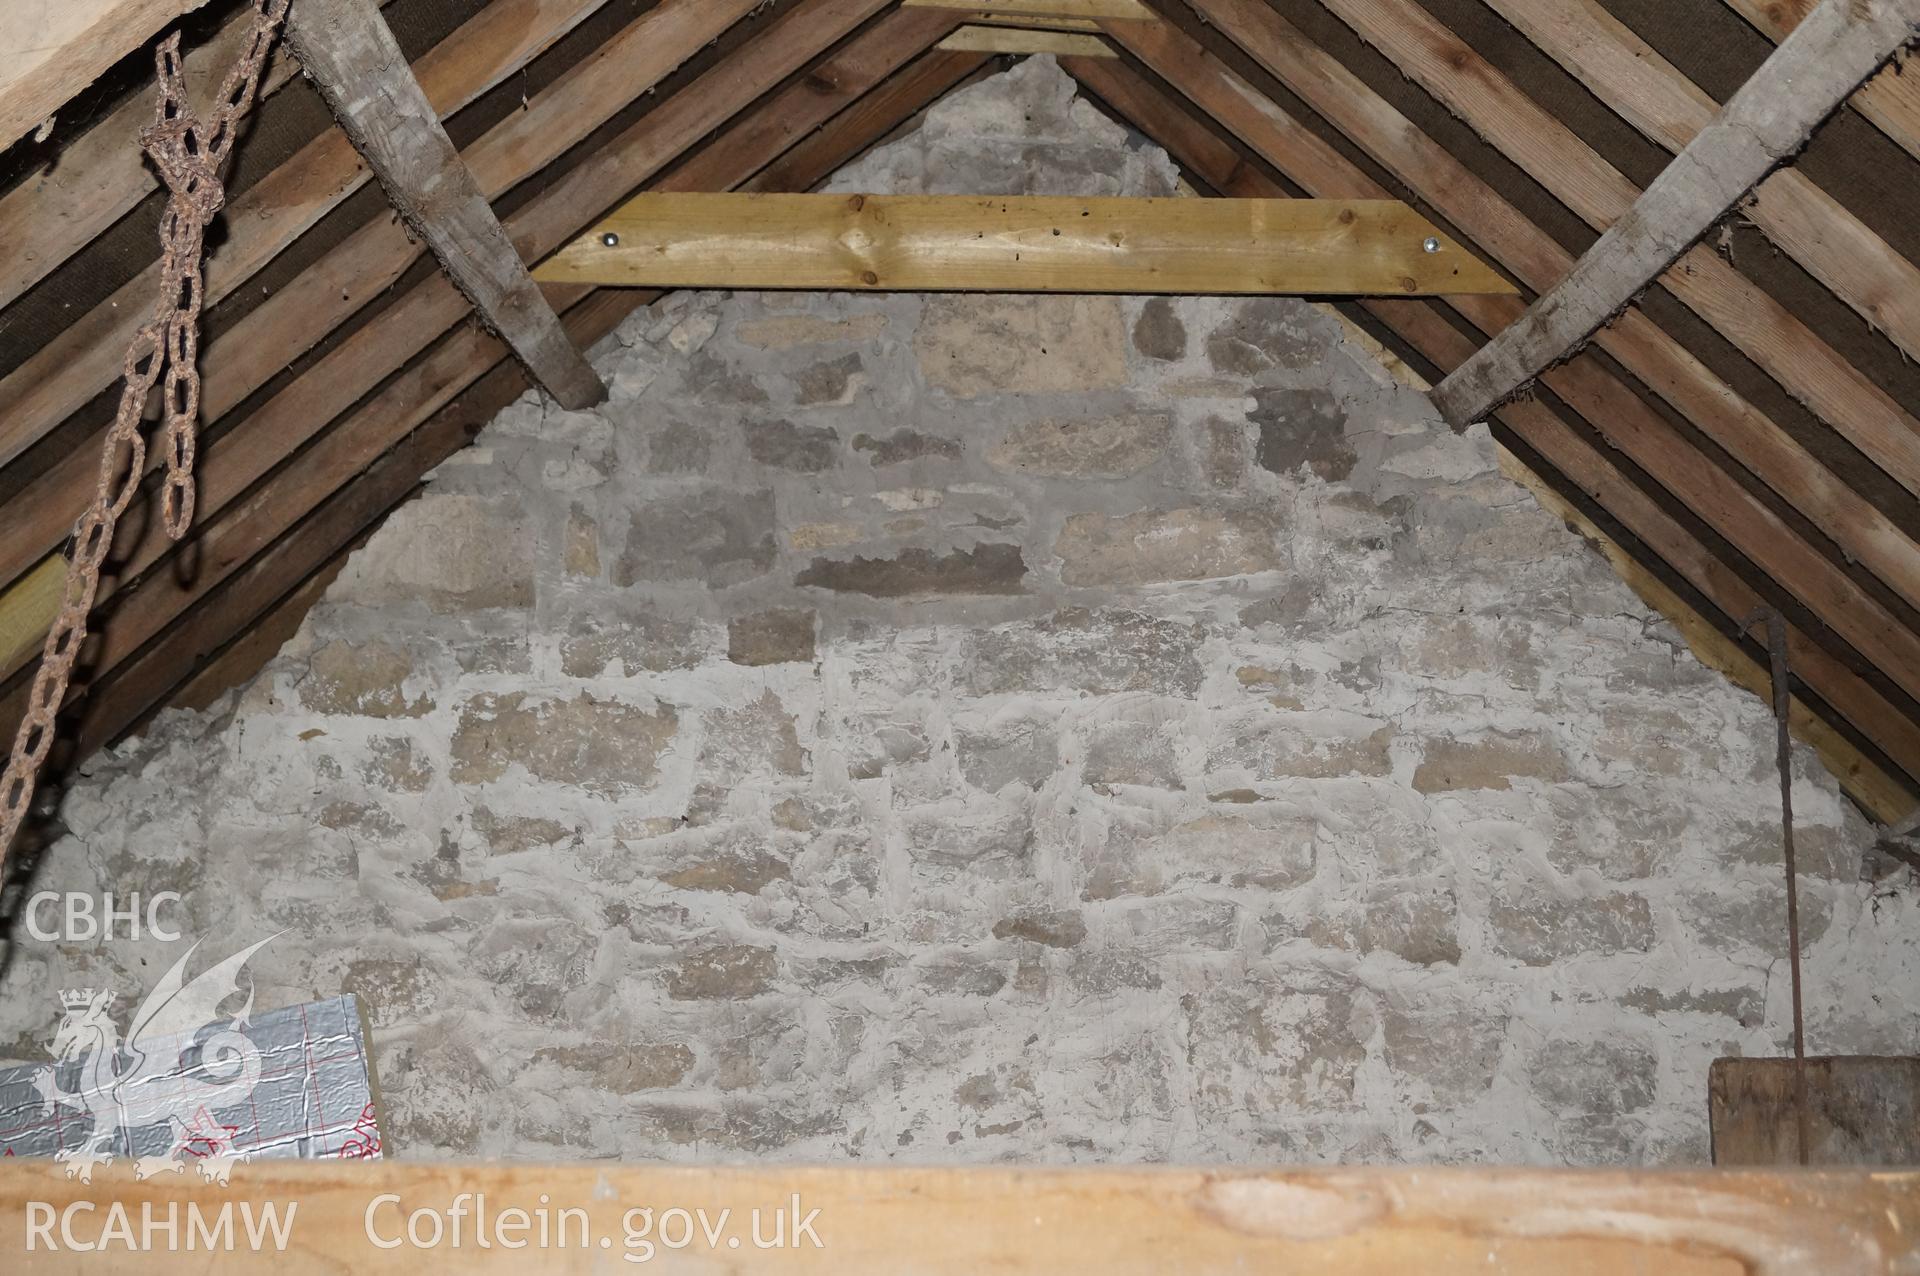 'Internal view looking west southwest at the western gable of barn' at Rowley Court, Llantwit Major. Photograph & description by Jenny Hall & Paul Sambrook of Trysor, 25th May 2017.